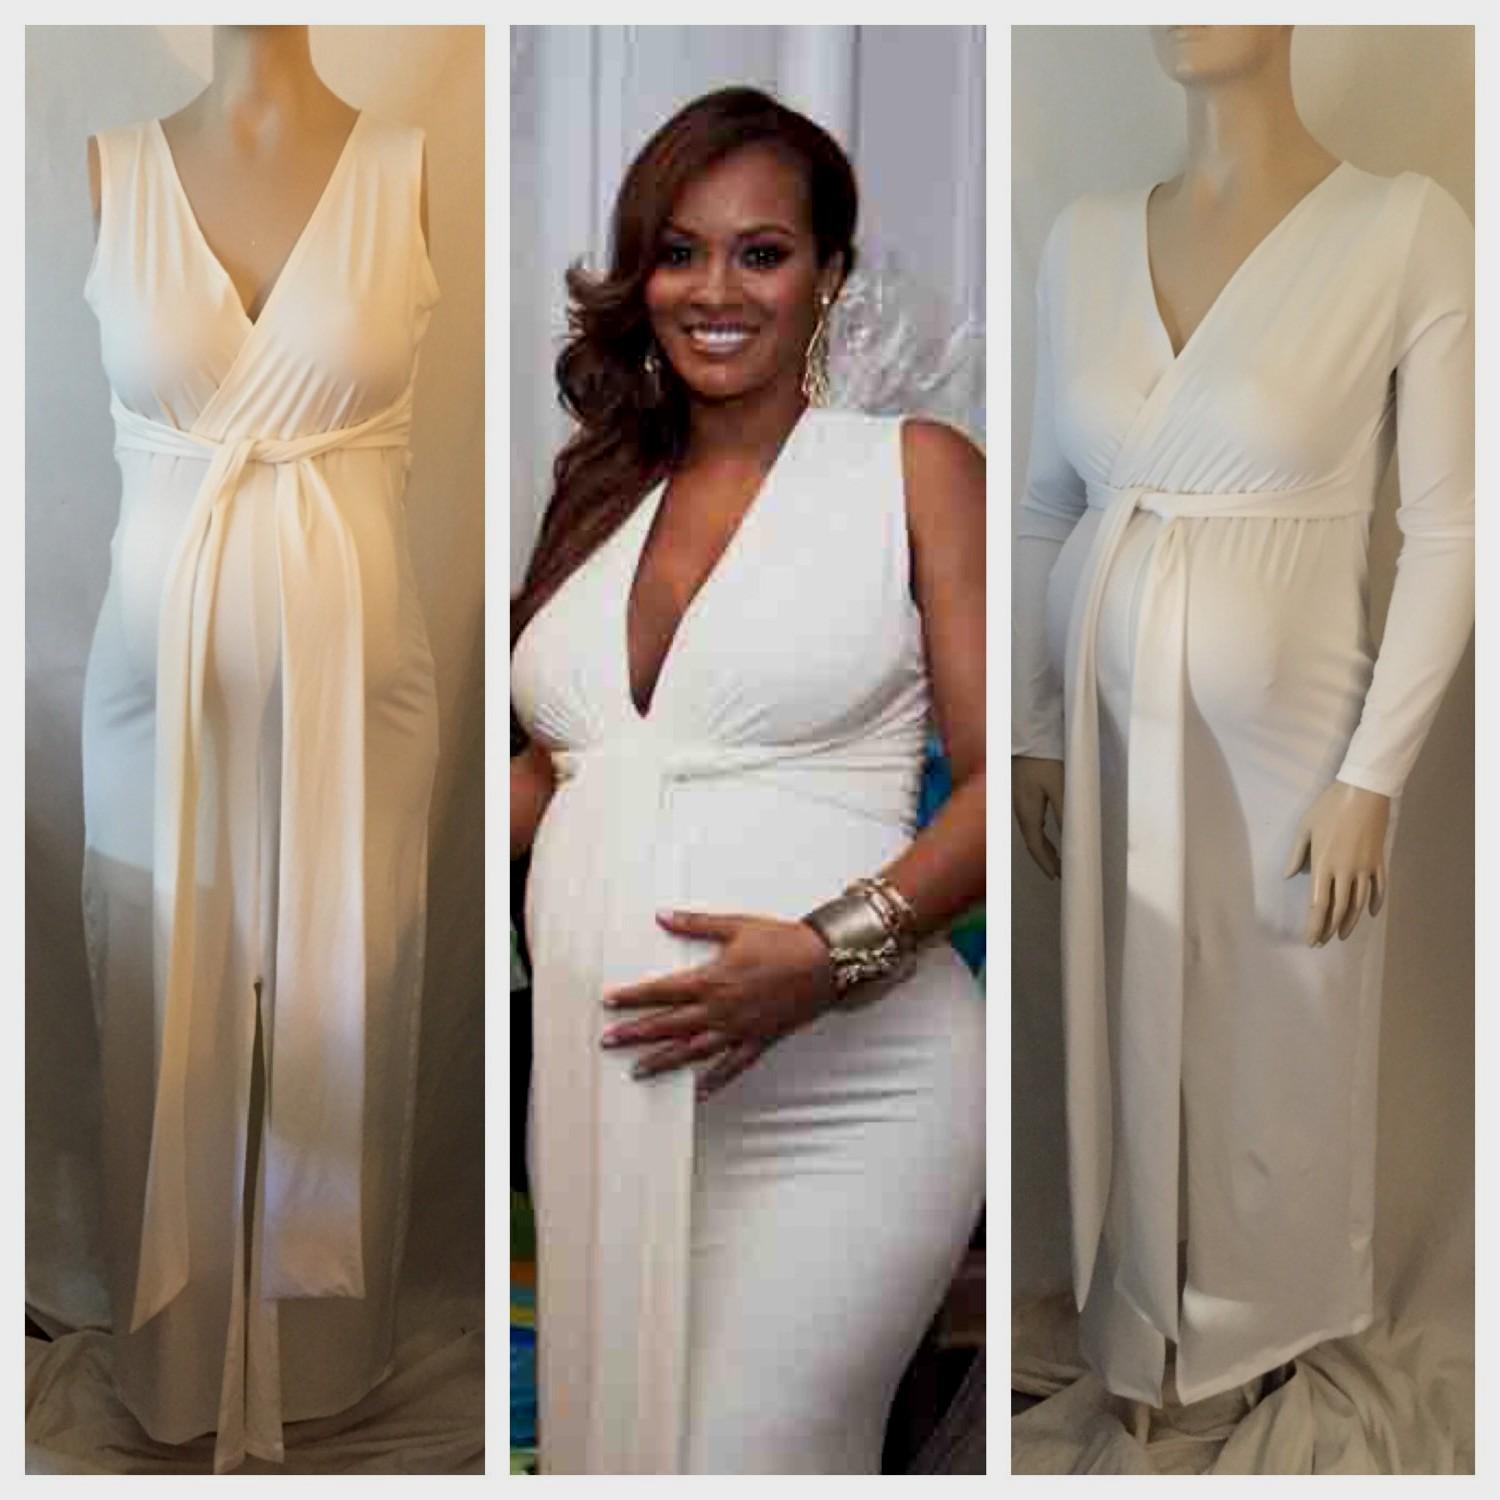 Full Size of Baby Shower:baby Shower Dresses Trendy Affordable Maternity Clothes Inexpensive Maternity Clothes Maternity Dresses For Photoshoot Affordable Maternity Dresses For Baby Shower Long Maternity Dresses For Baby Shower Cheap Plus Size Maternity Clothes Baby Shower Dresses For Fall